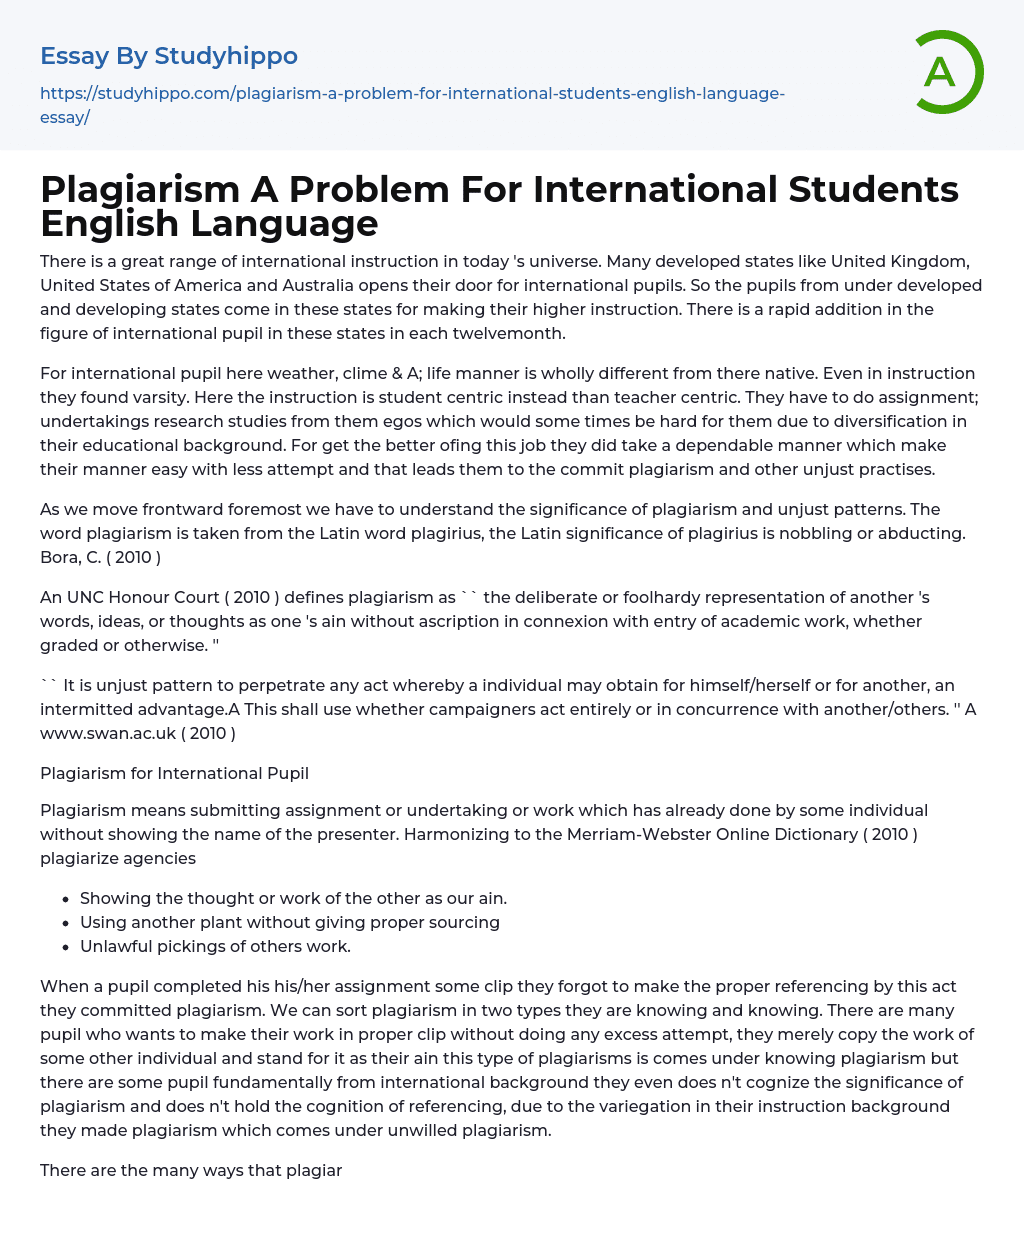 Plagiarism A Problem For International Students English Language Essay Example